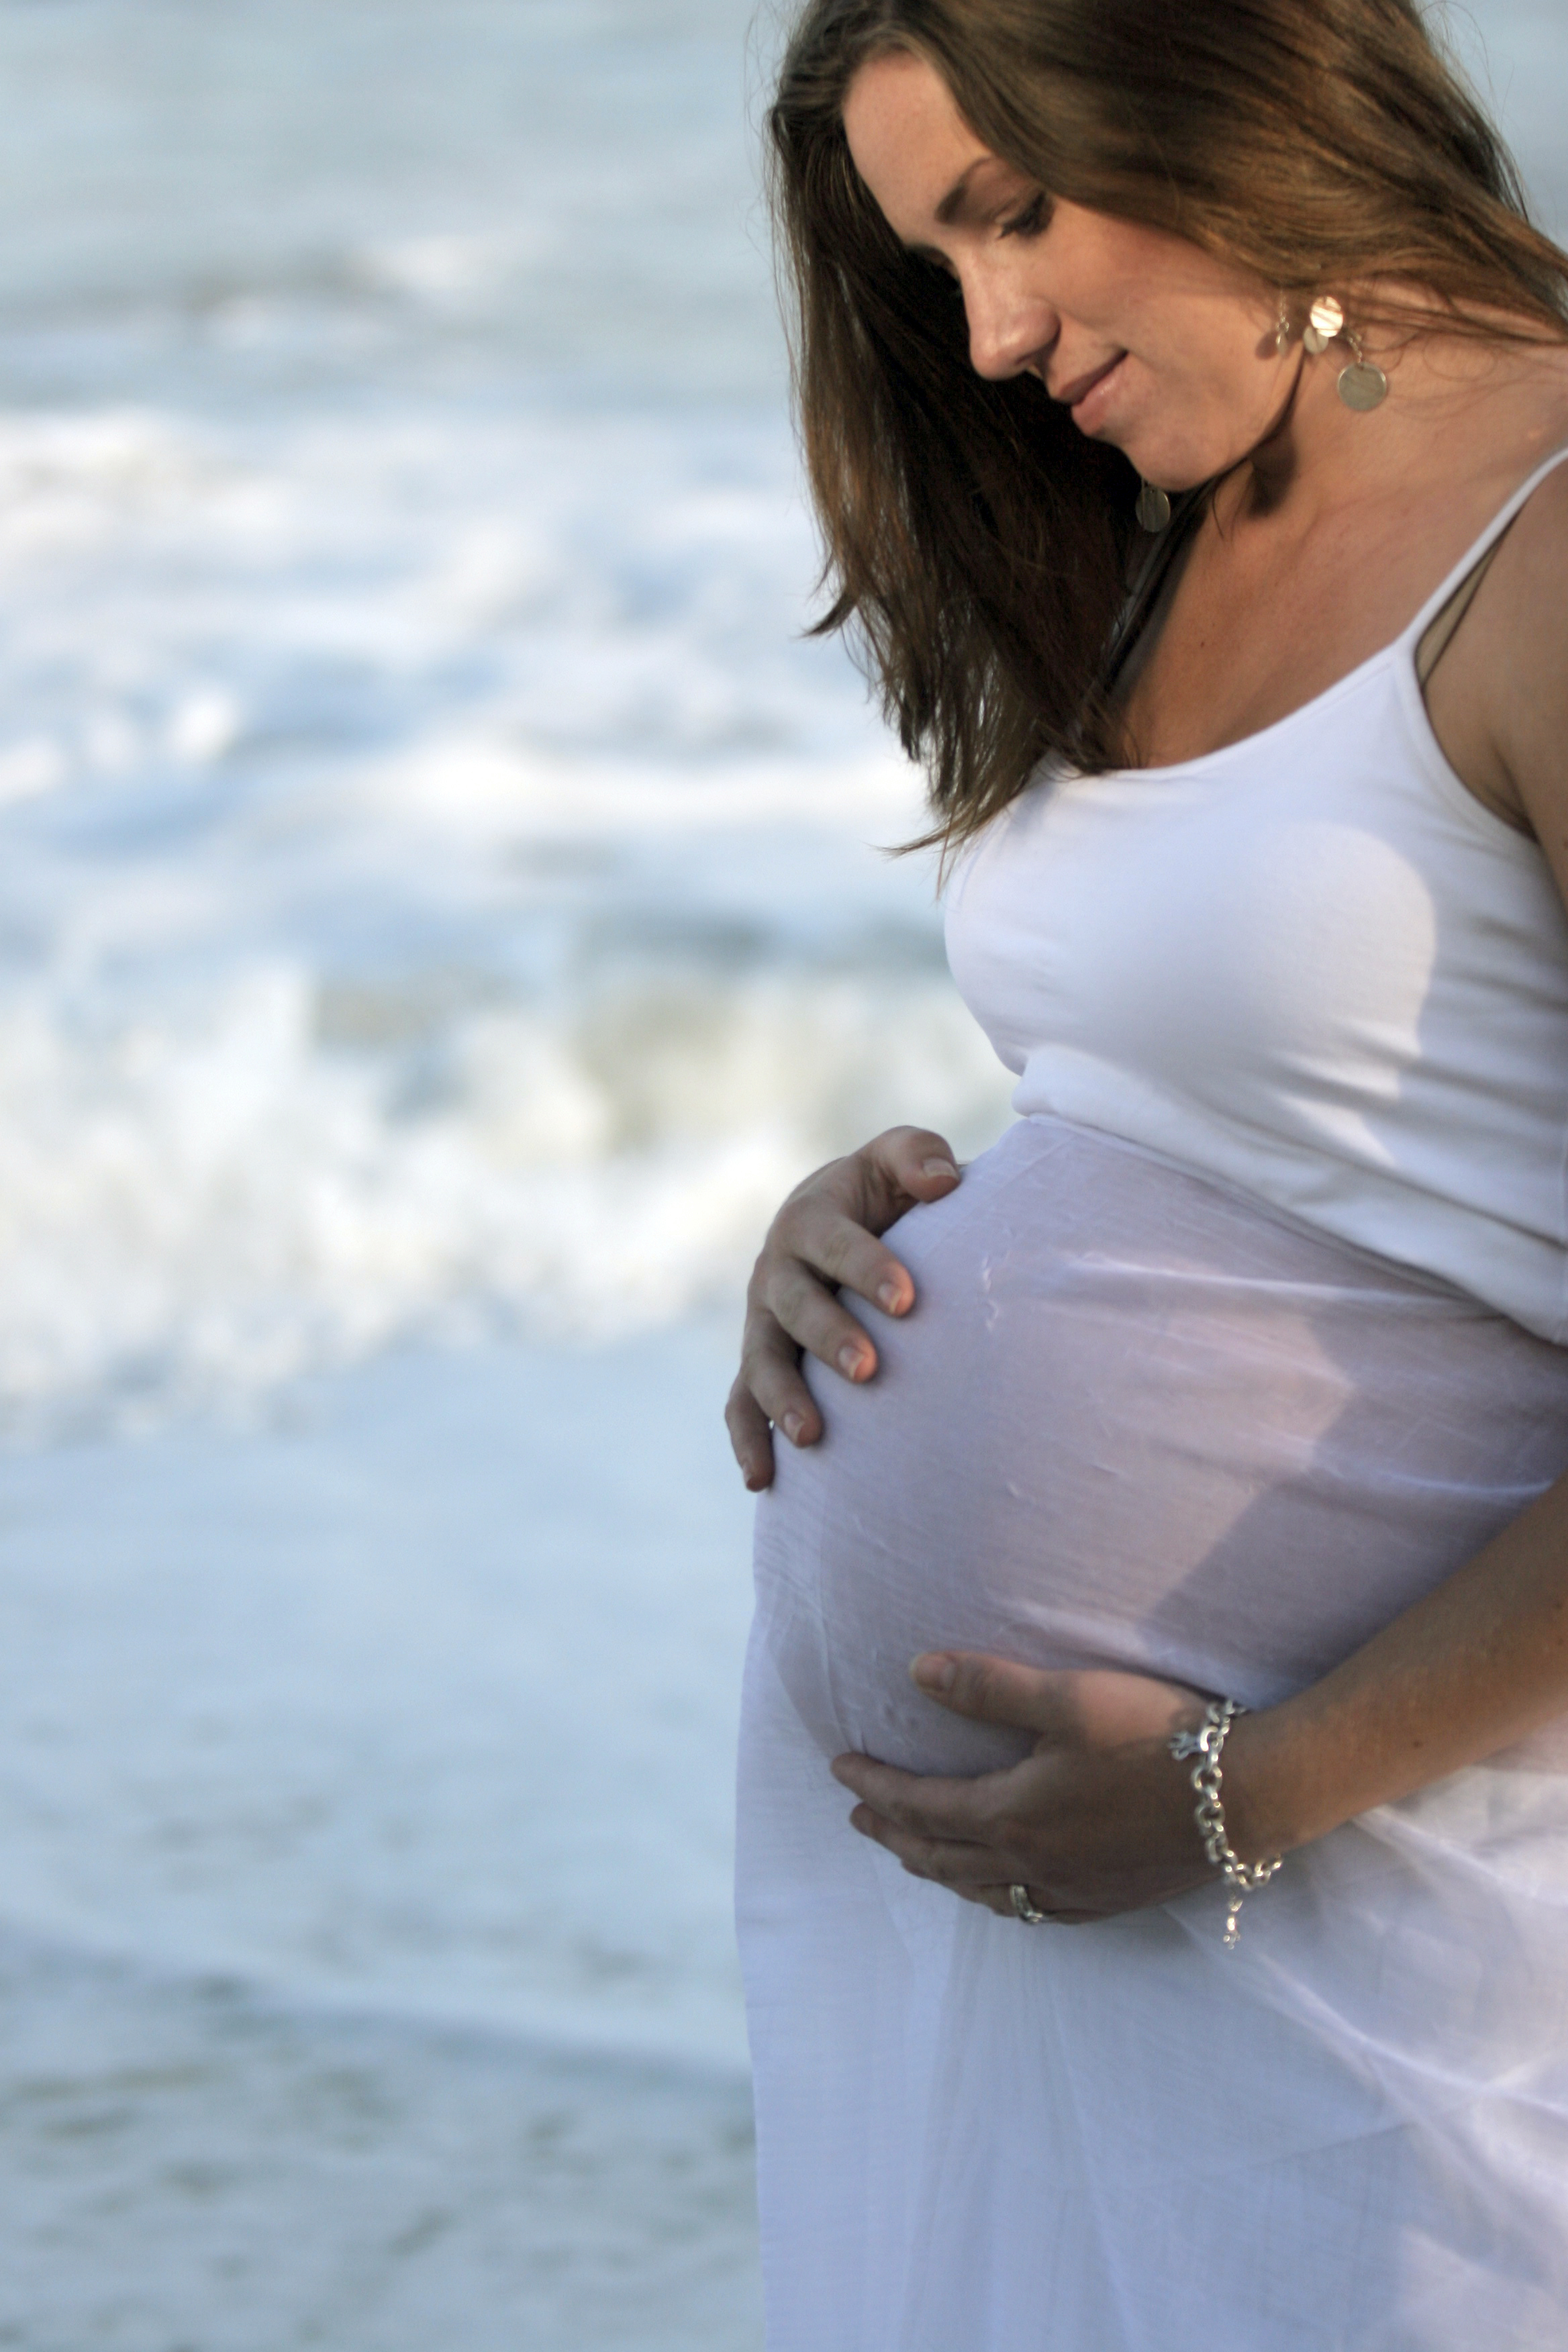 Expectant Mothers Live in a Perpetual State of Faith